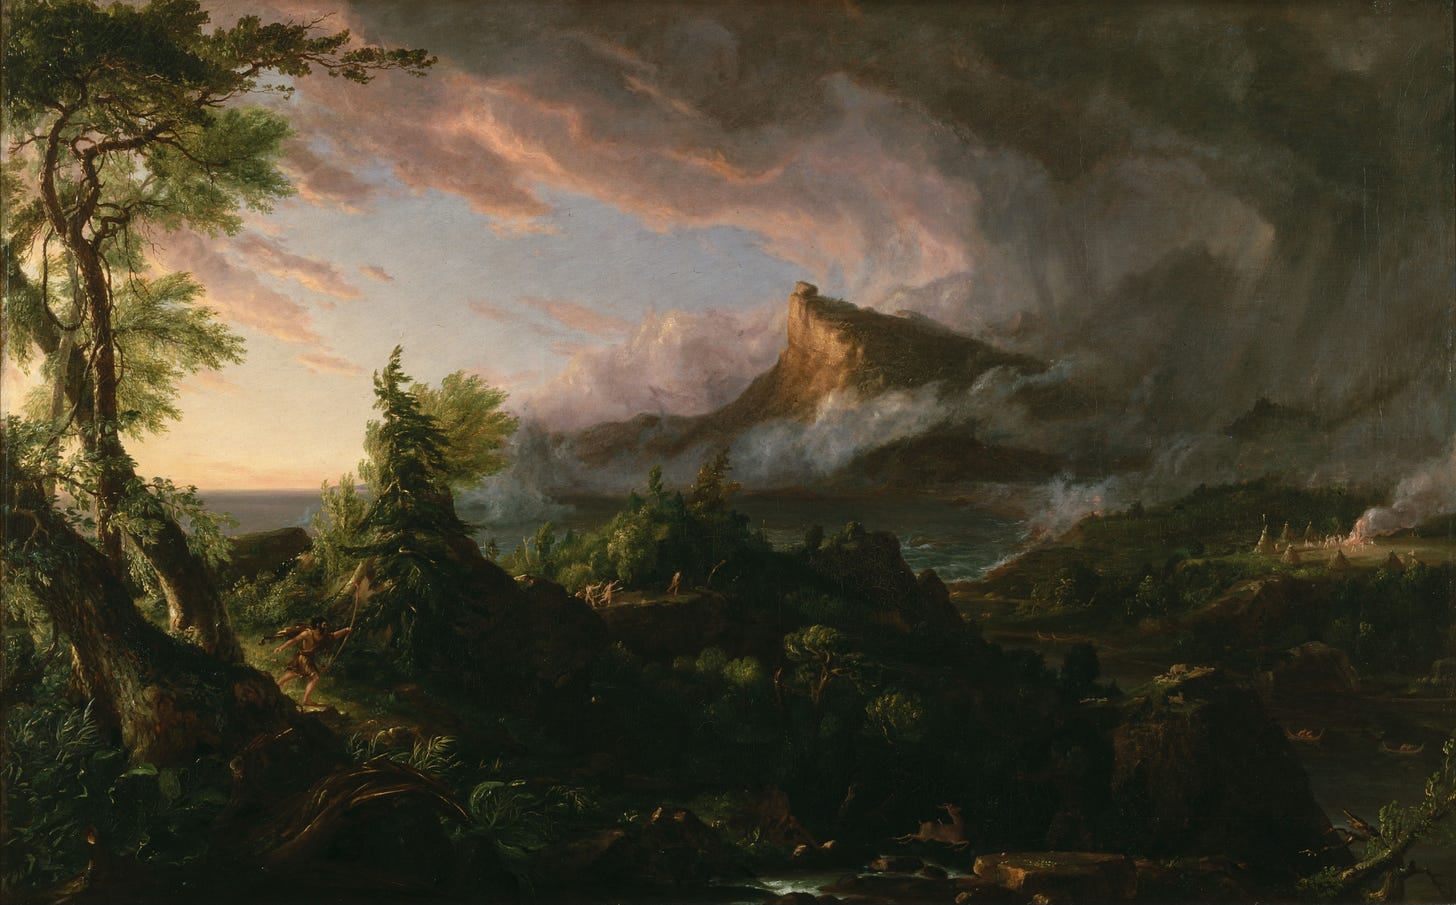 An oil painting entitled "The Course of Empire, The Commencement of Empire". It depicts a vast landscape at dawn. There is a fog-covered mountain in the background and an ocean is barely visible through the trees. Small humans wielding spears and wearing loincloths run through the woods. A few and small tents are barely visible in the right mid ground.